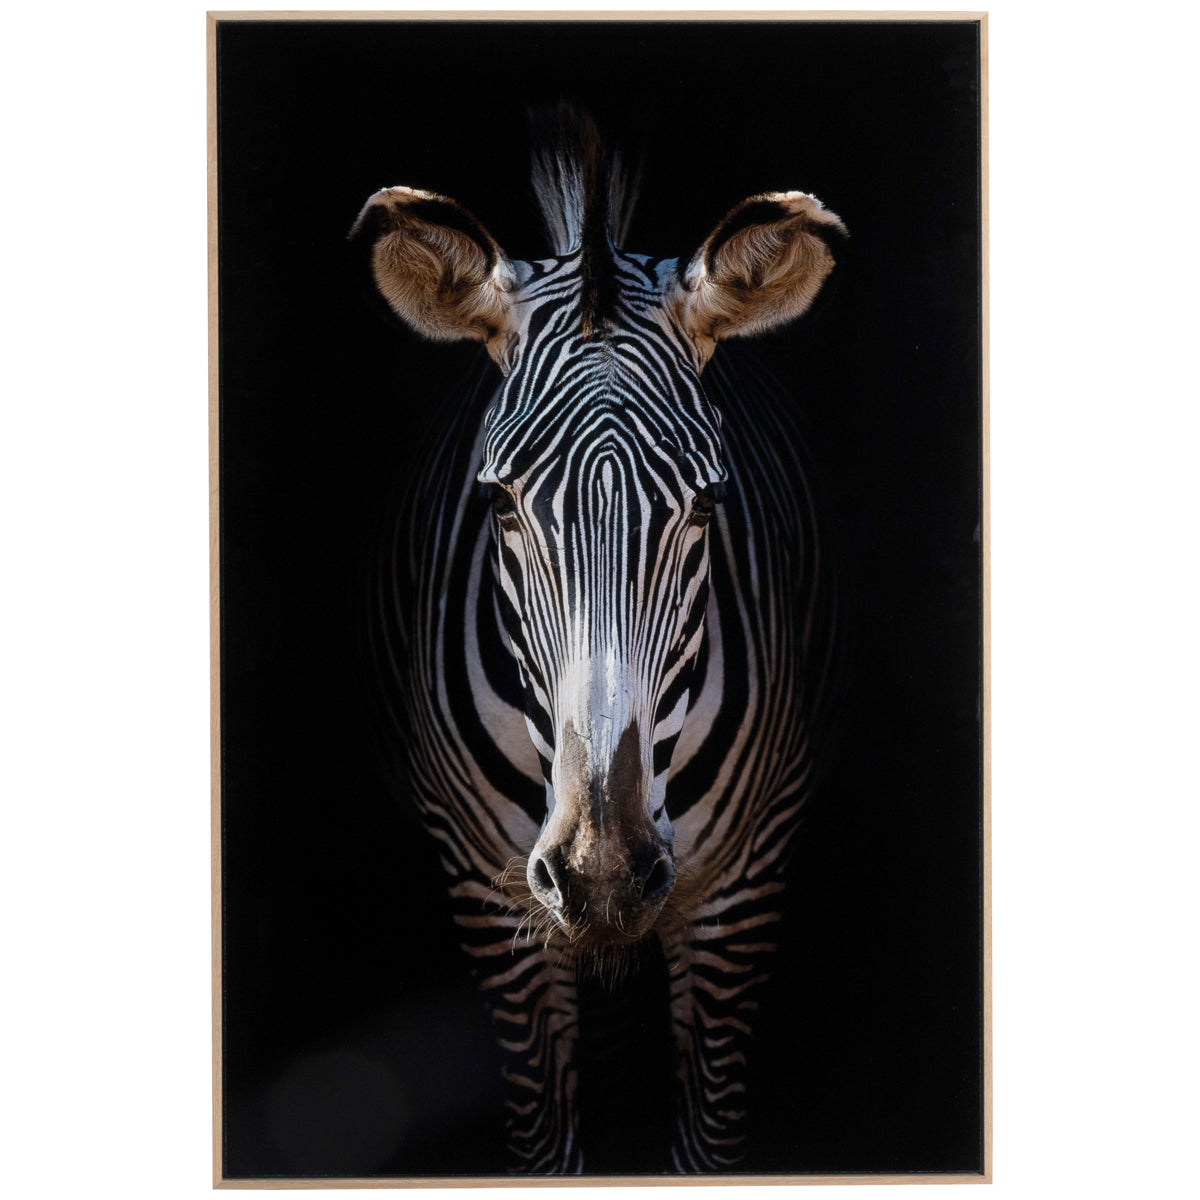 Four Hands Art Studio Zebra Stare By Getty Images